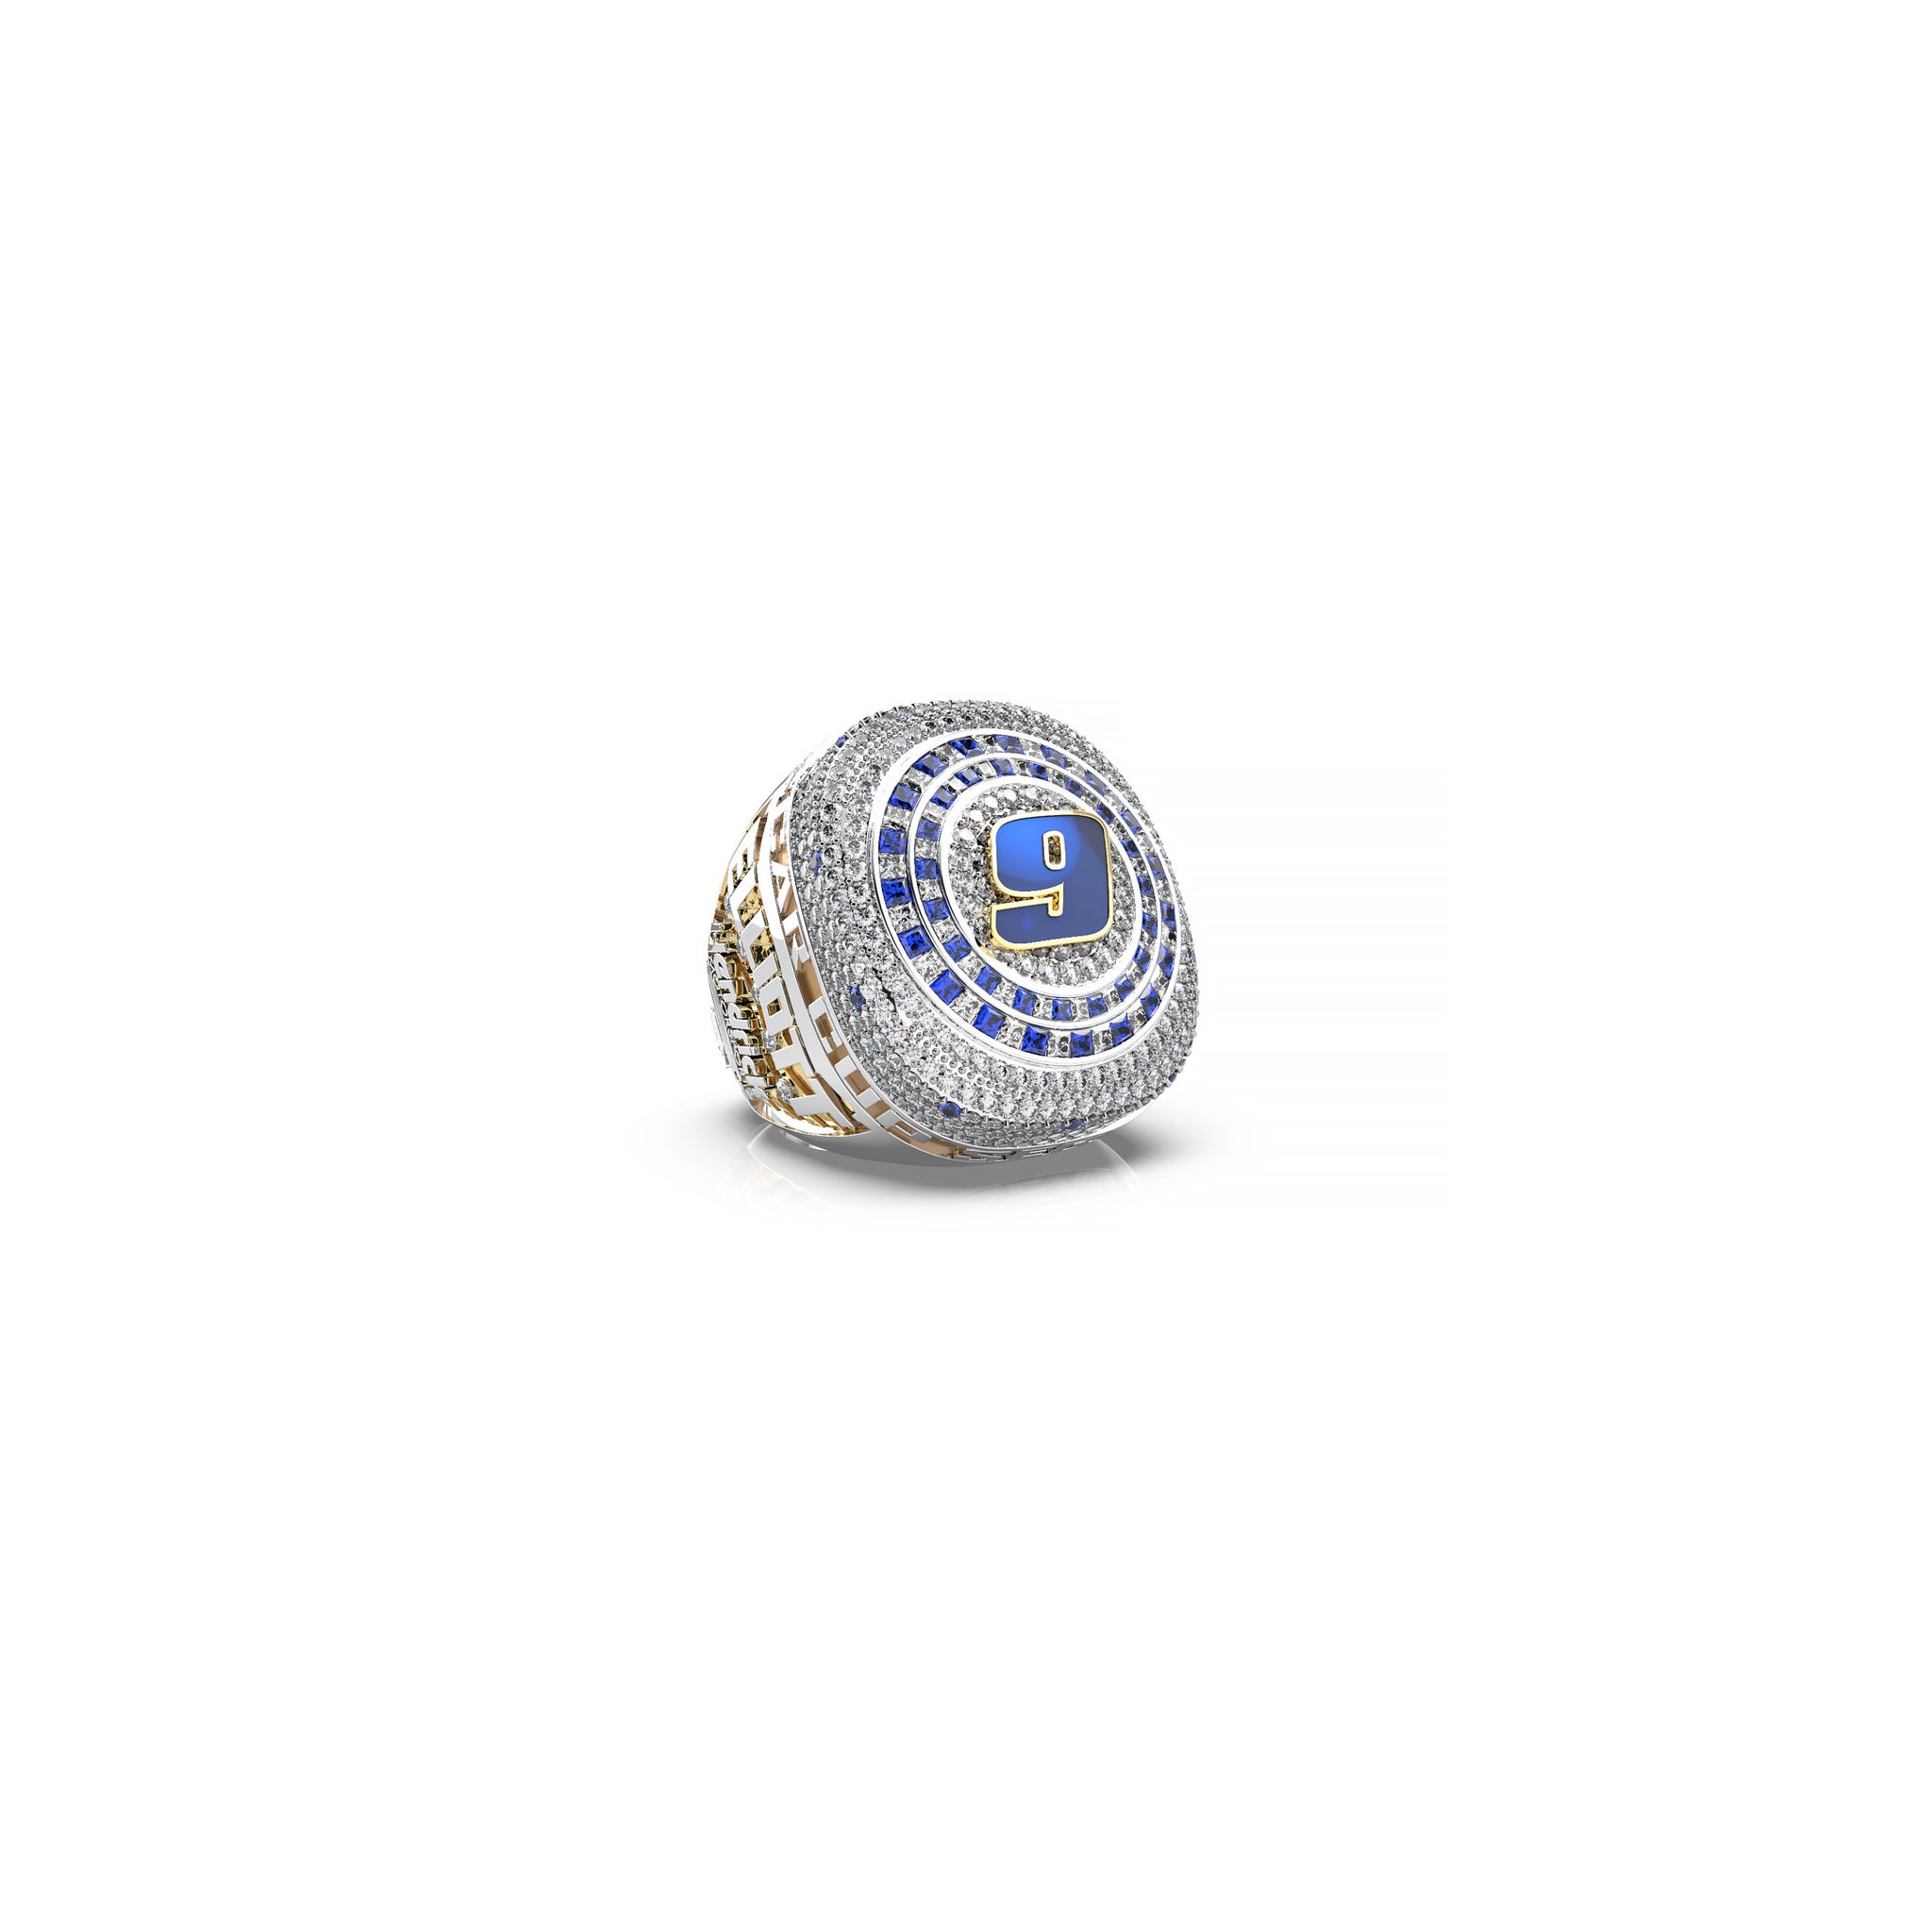 EMPLOYEES ONLY - Hendrick Motorsports - LADIES - Chase Elliott Cup Series Championship Ring - 2020